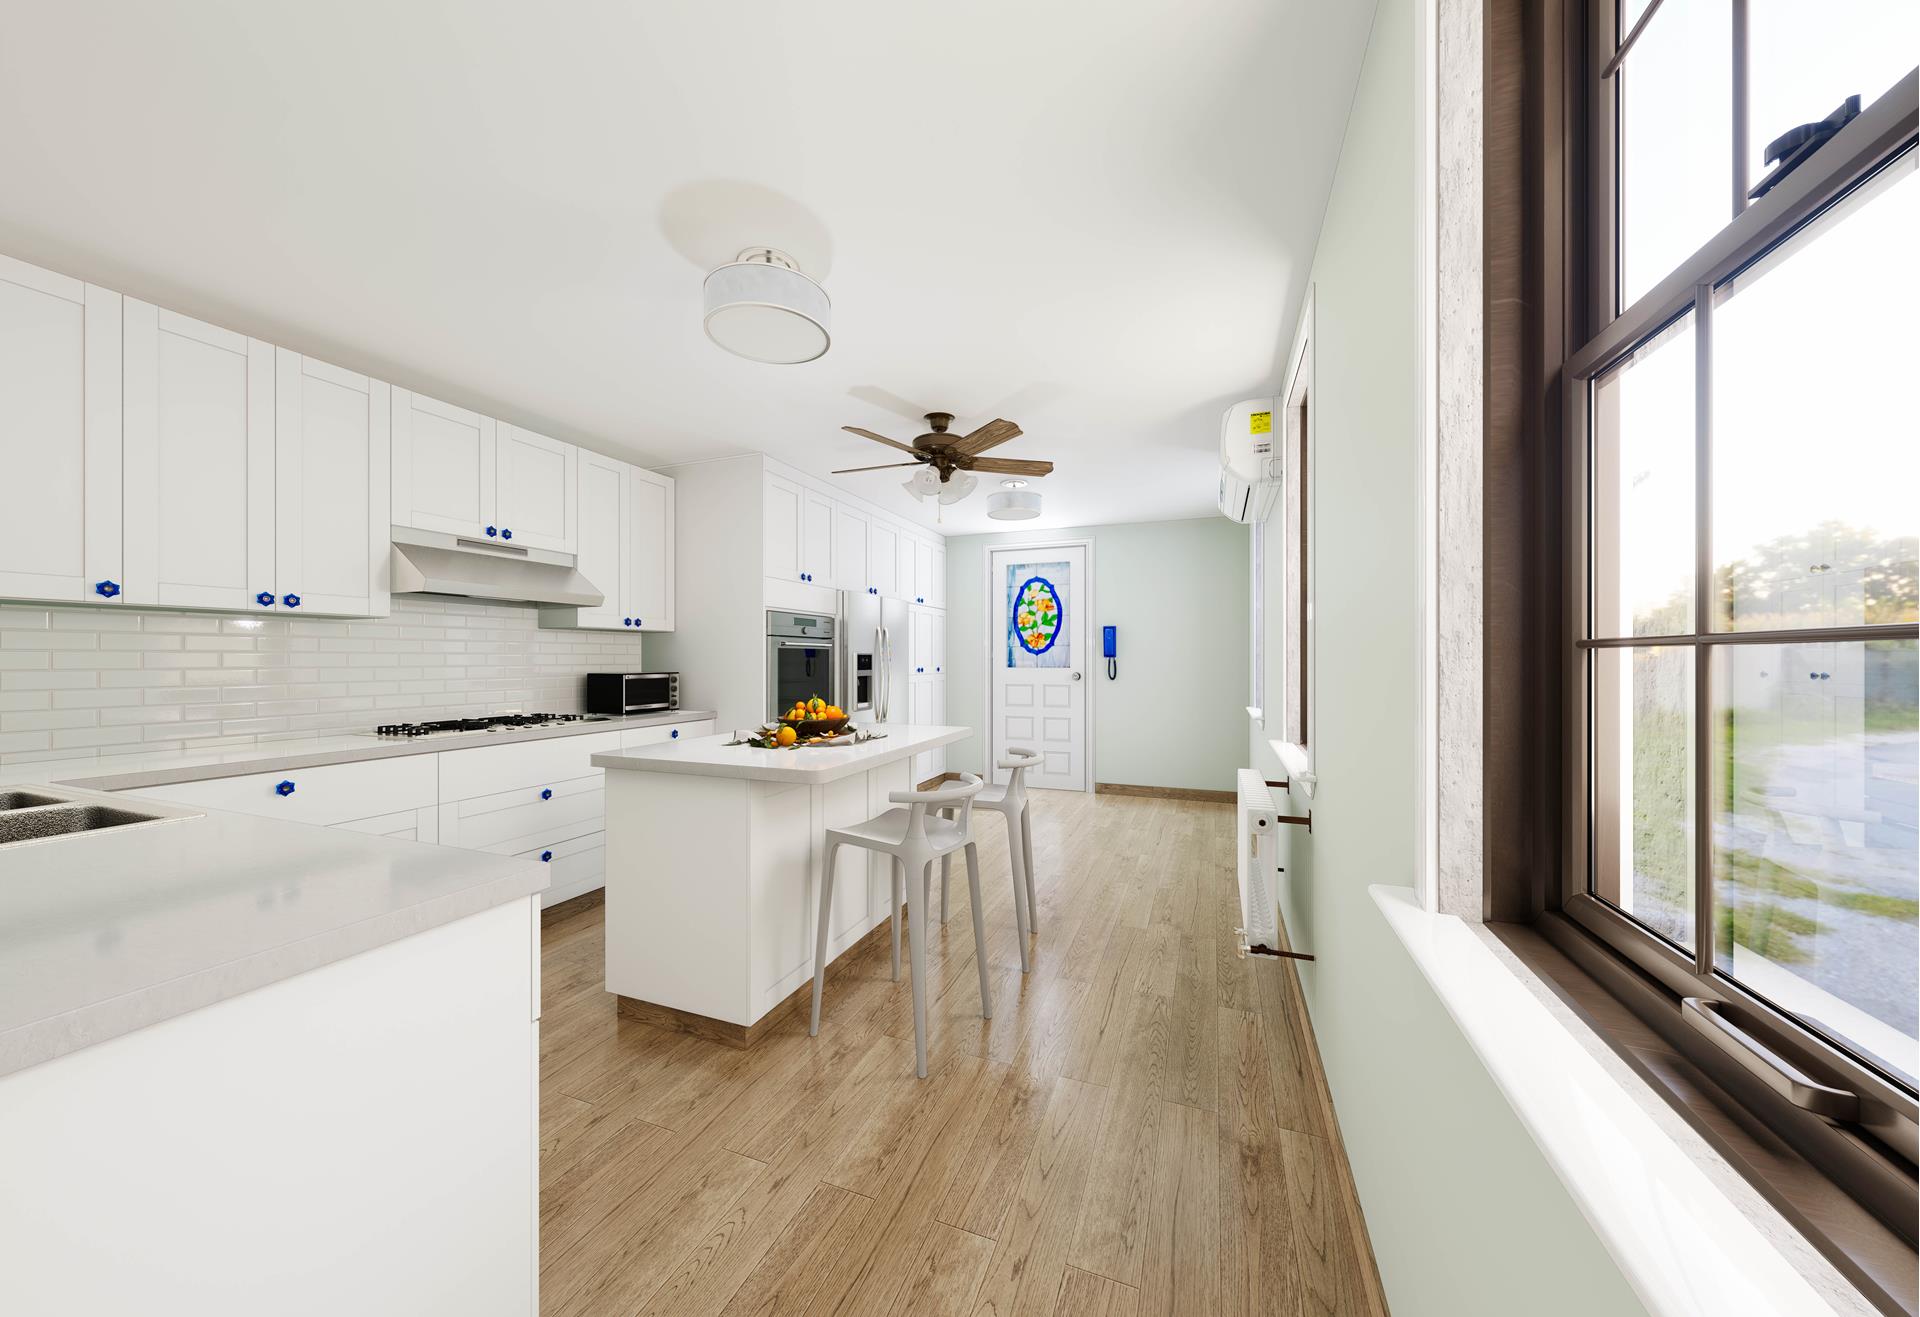 108 Withers Street, Williamsburg North, Brooklyn, New York - 3 Bedrooms  
2 Bathrooms  
7 Rooms - 